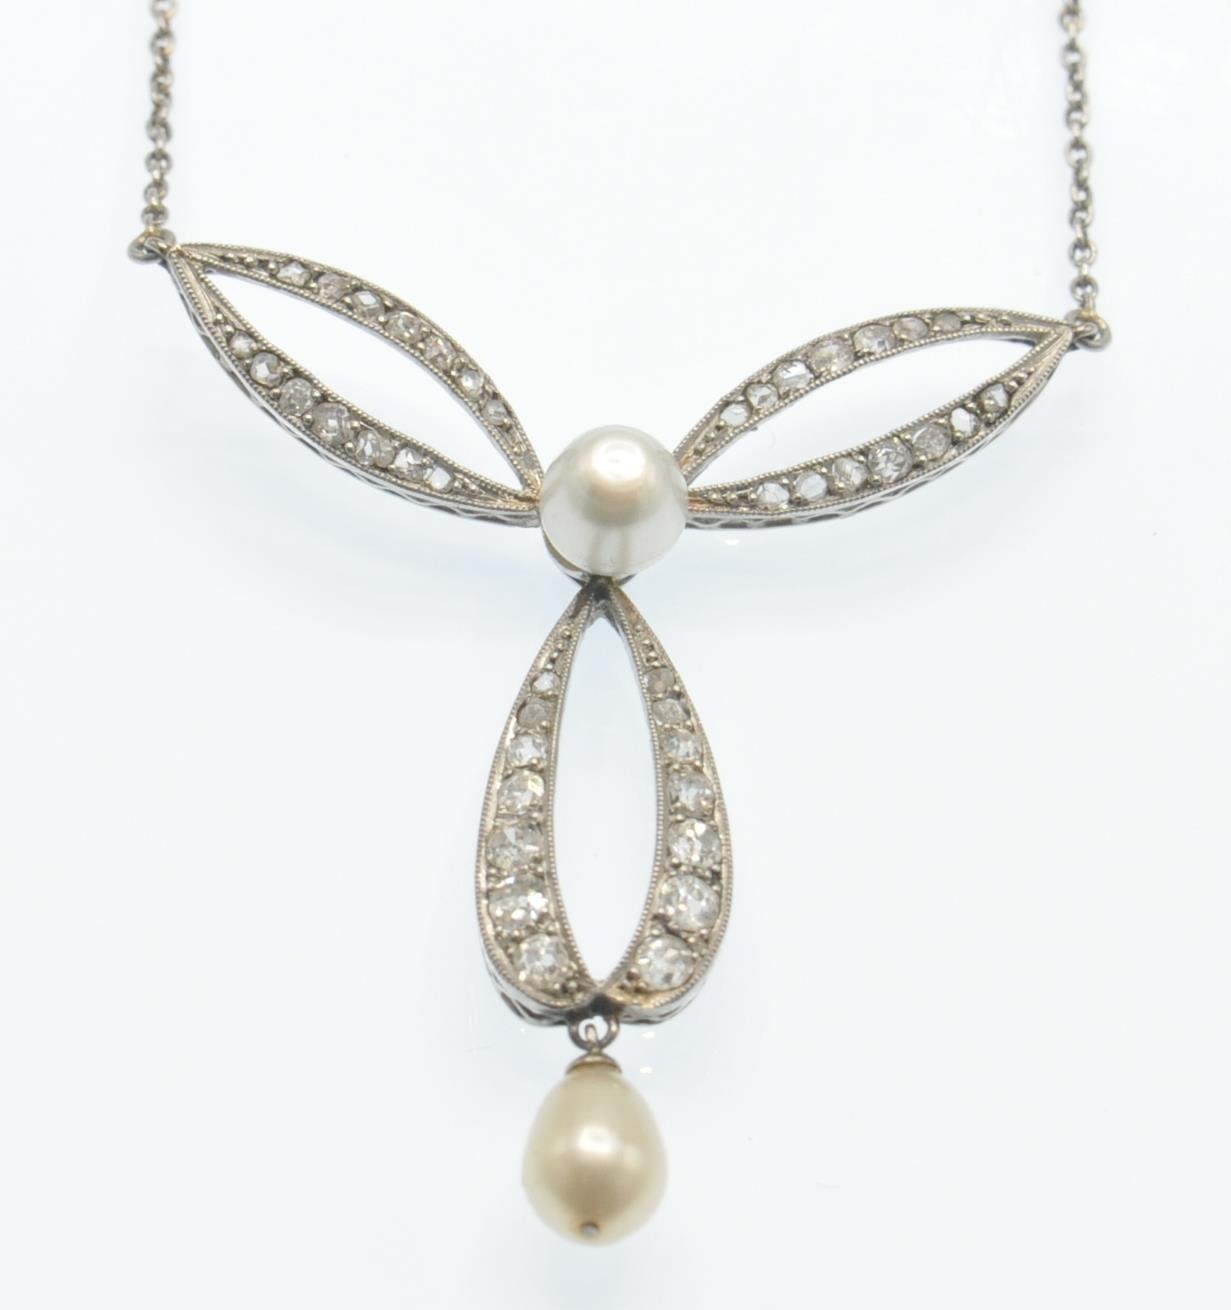 An Antique Cased 18ct White Gold Pearl & Diamond Pendant Necklace